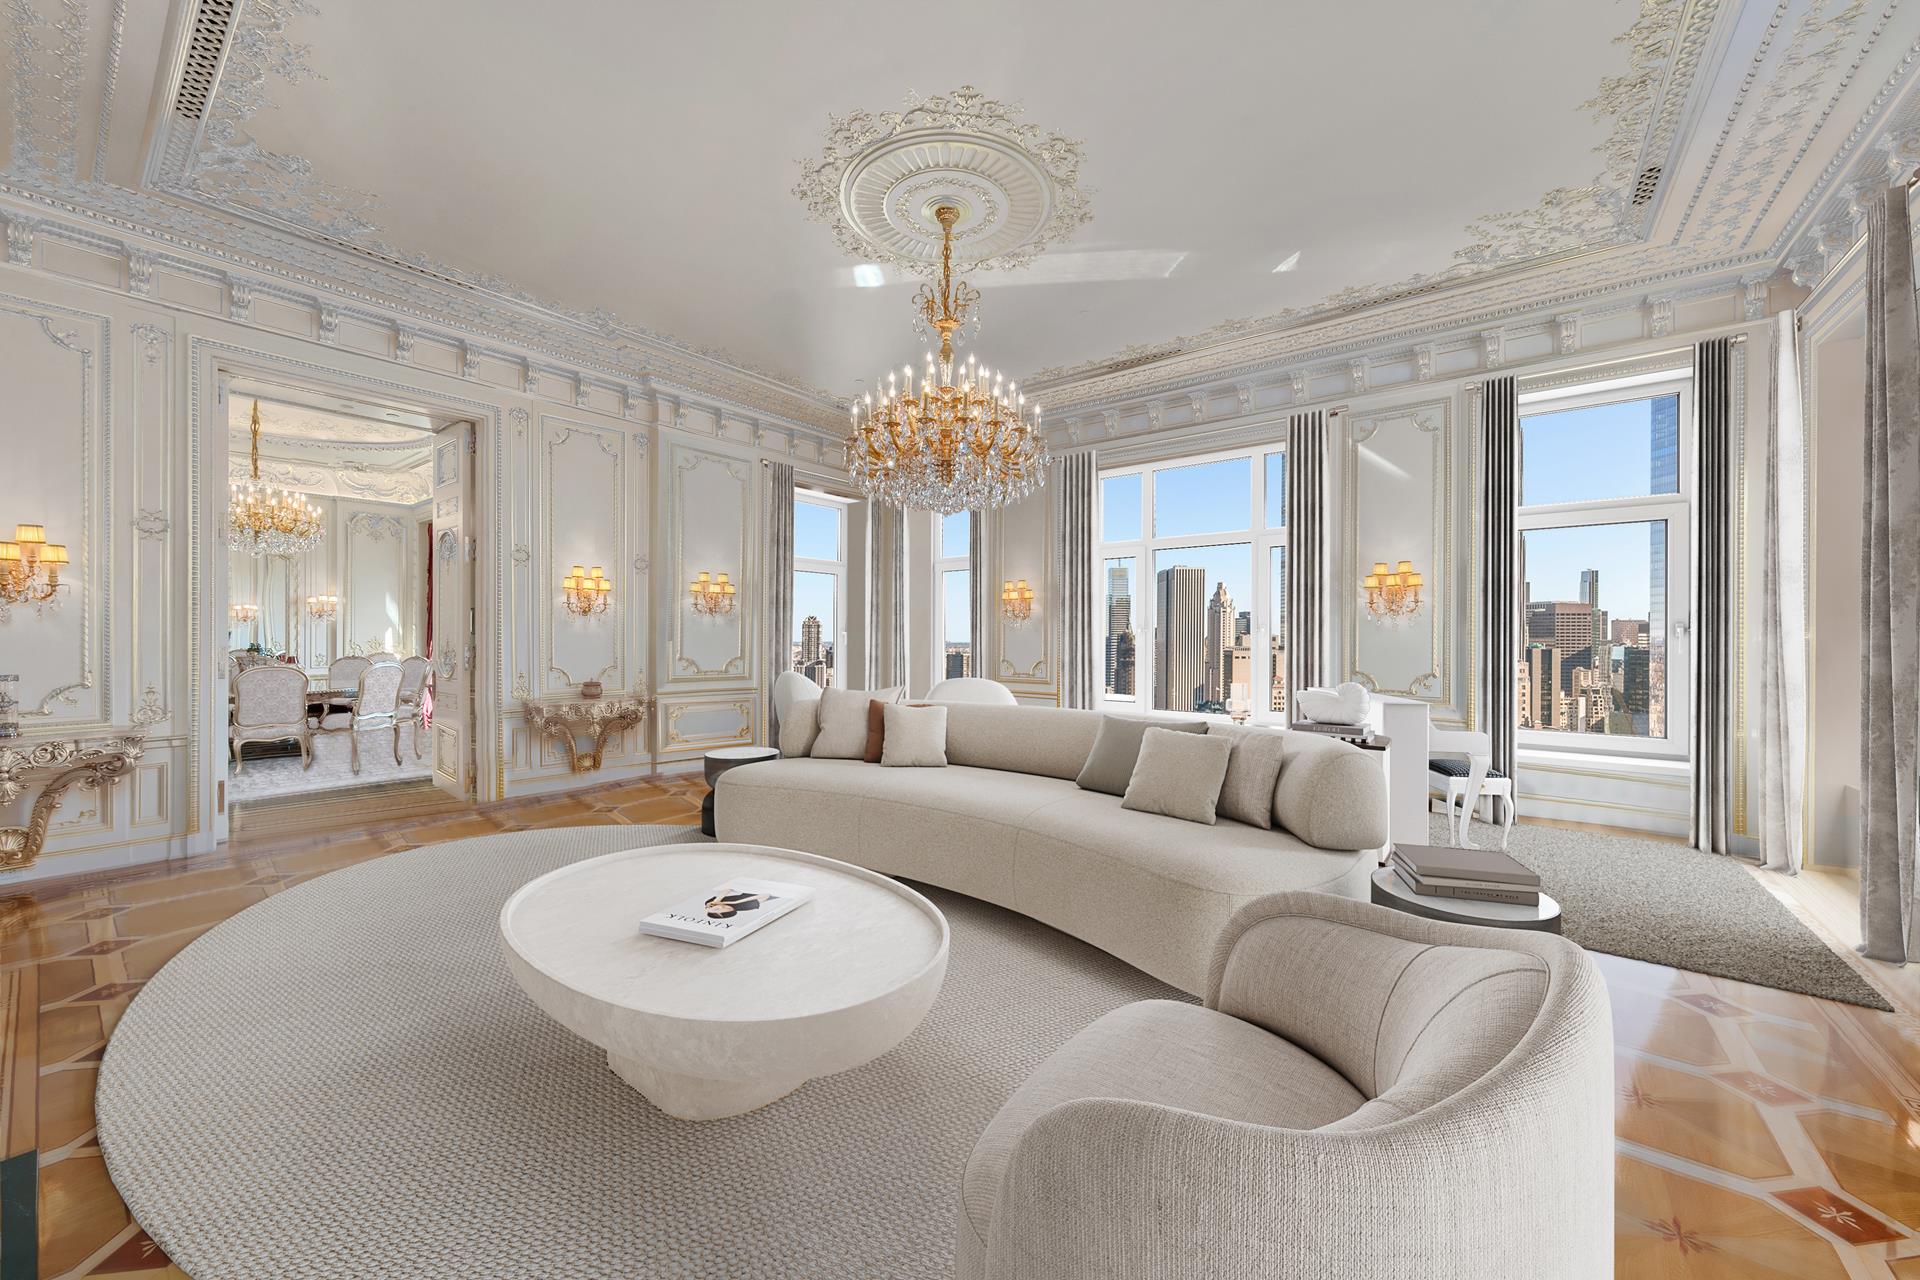 15 Central Park Ph40a/6K, Lincoln Sq, Upper West Side, NYC - 5 Bedrooms  
5.5 Bathrooms  
14 Rooms - 